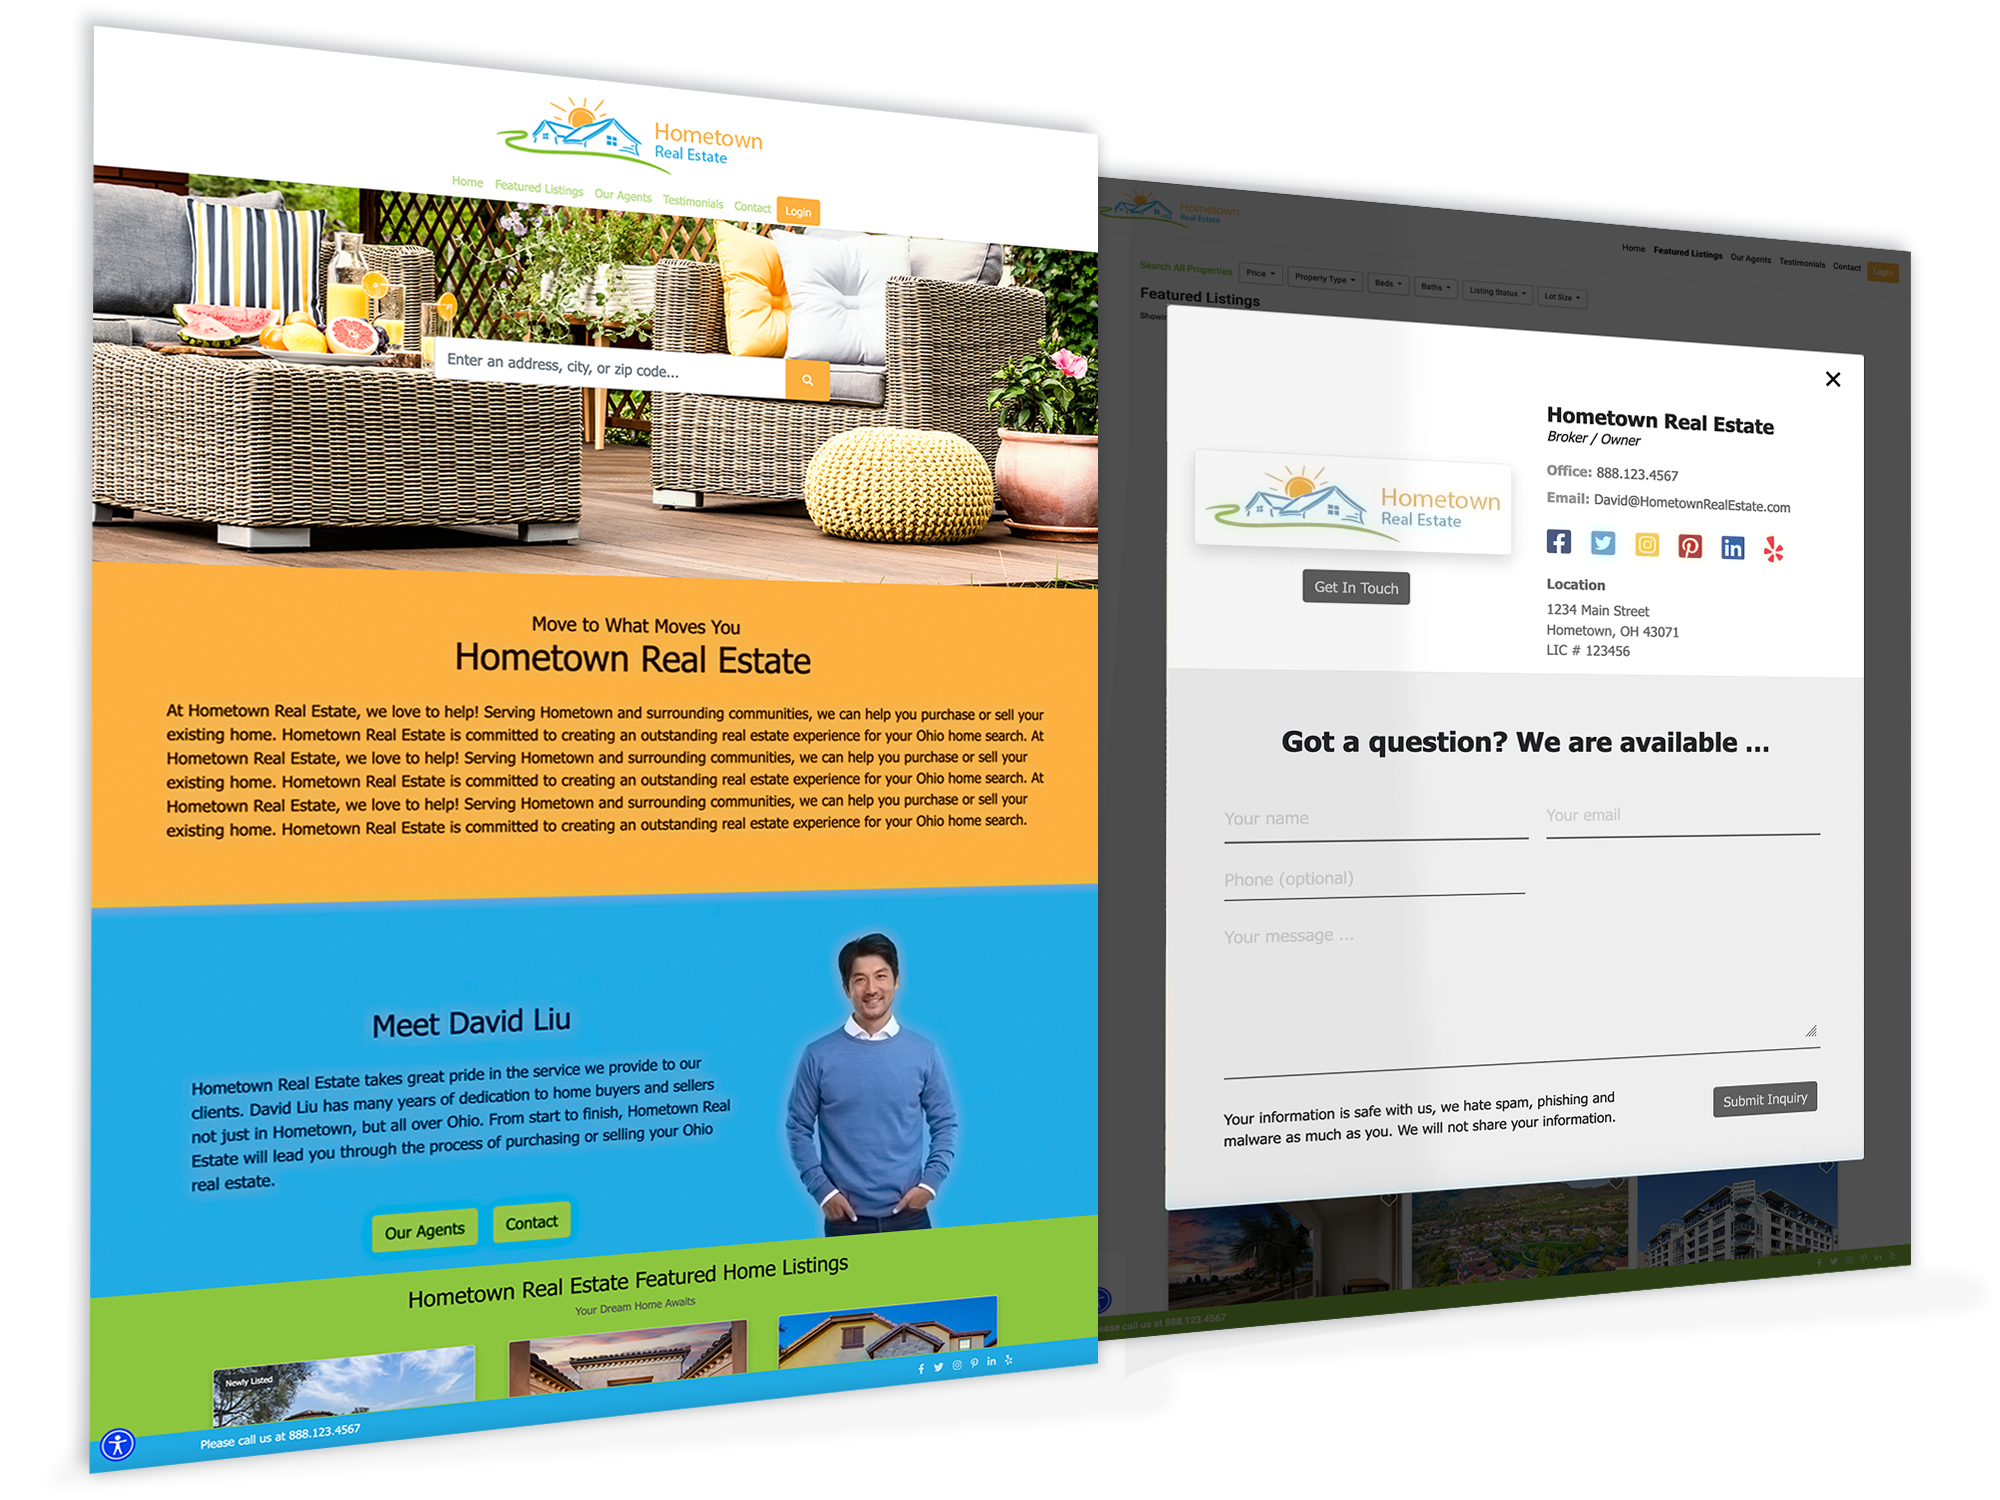 With OSI IDX, you can quickly create a beautiful website